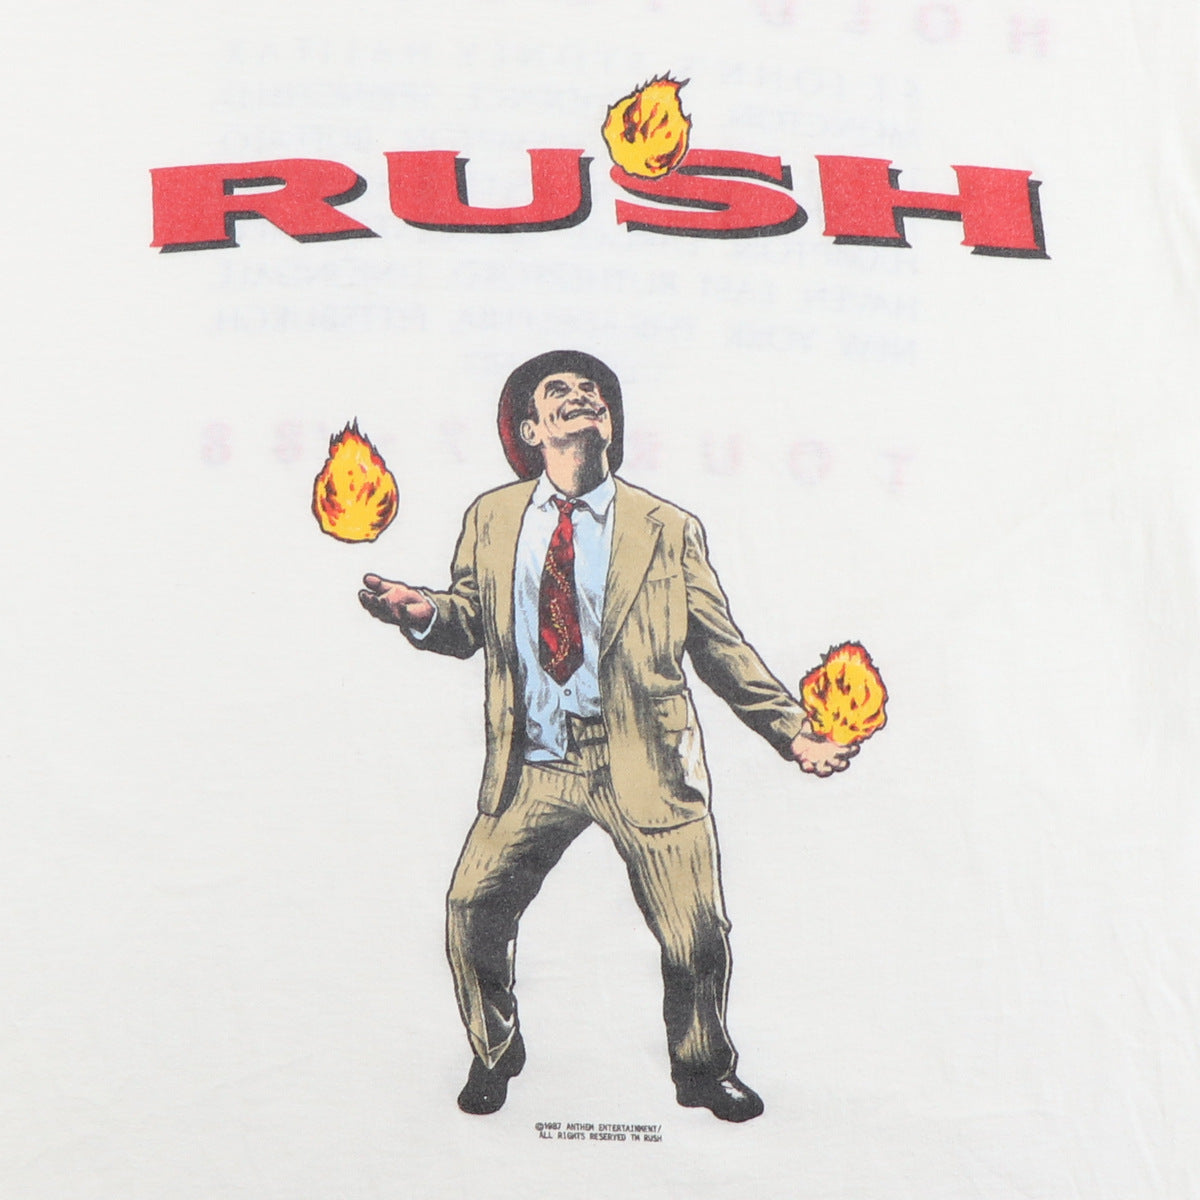 1987 Rush Hold Your Fire Tour Shirt